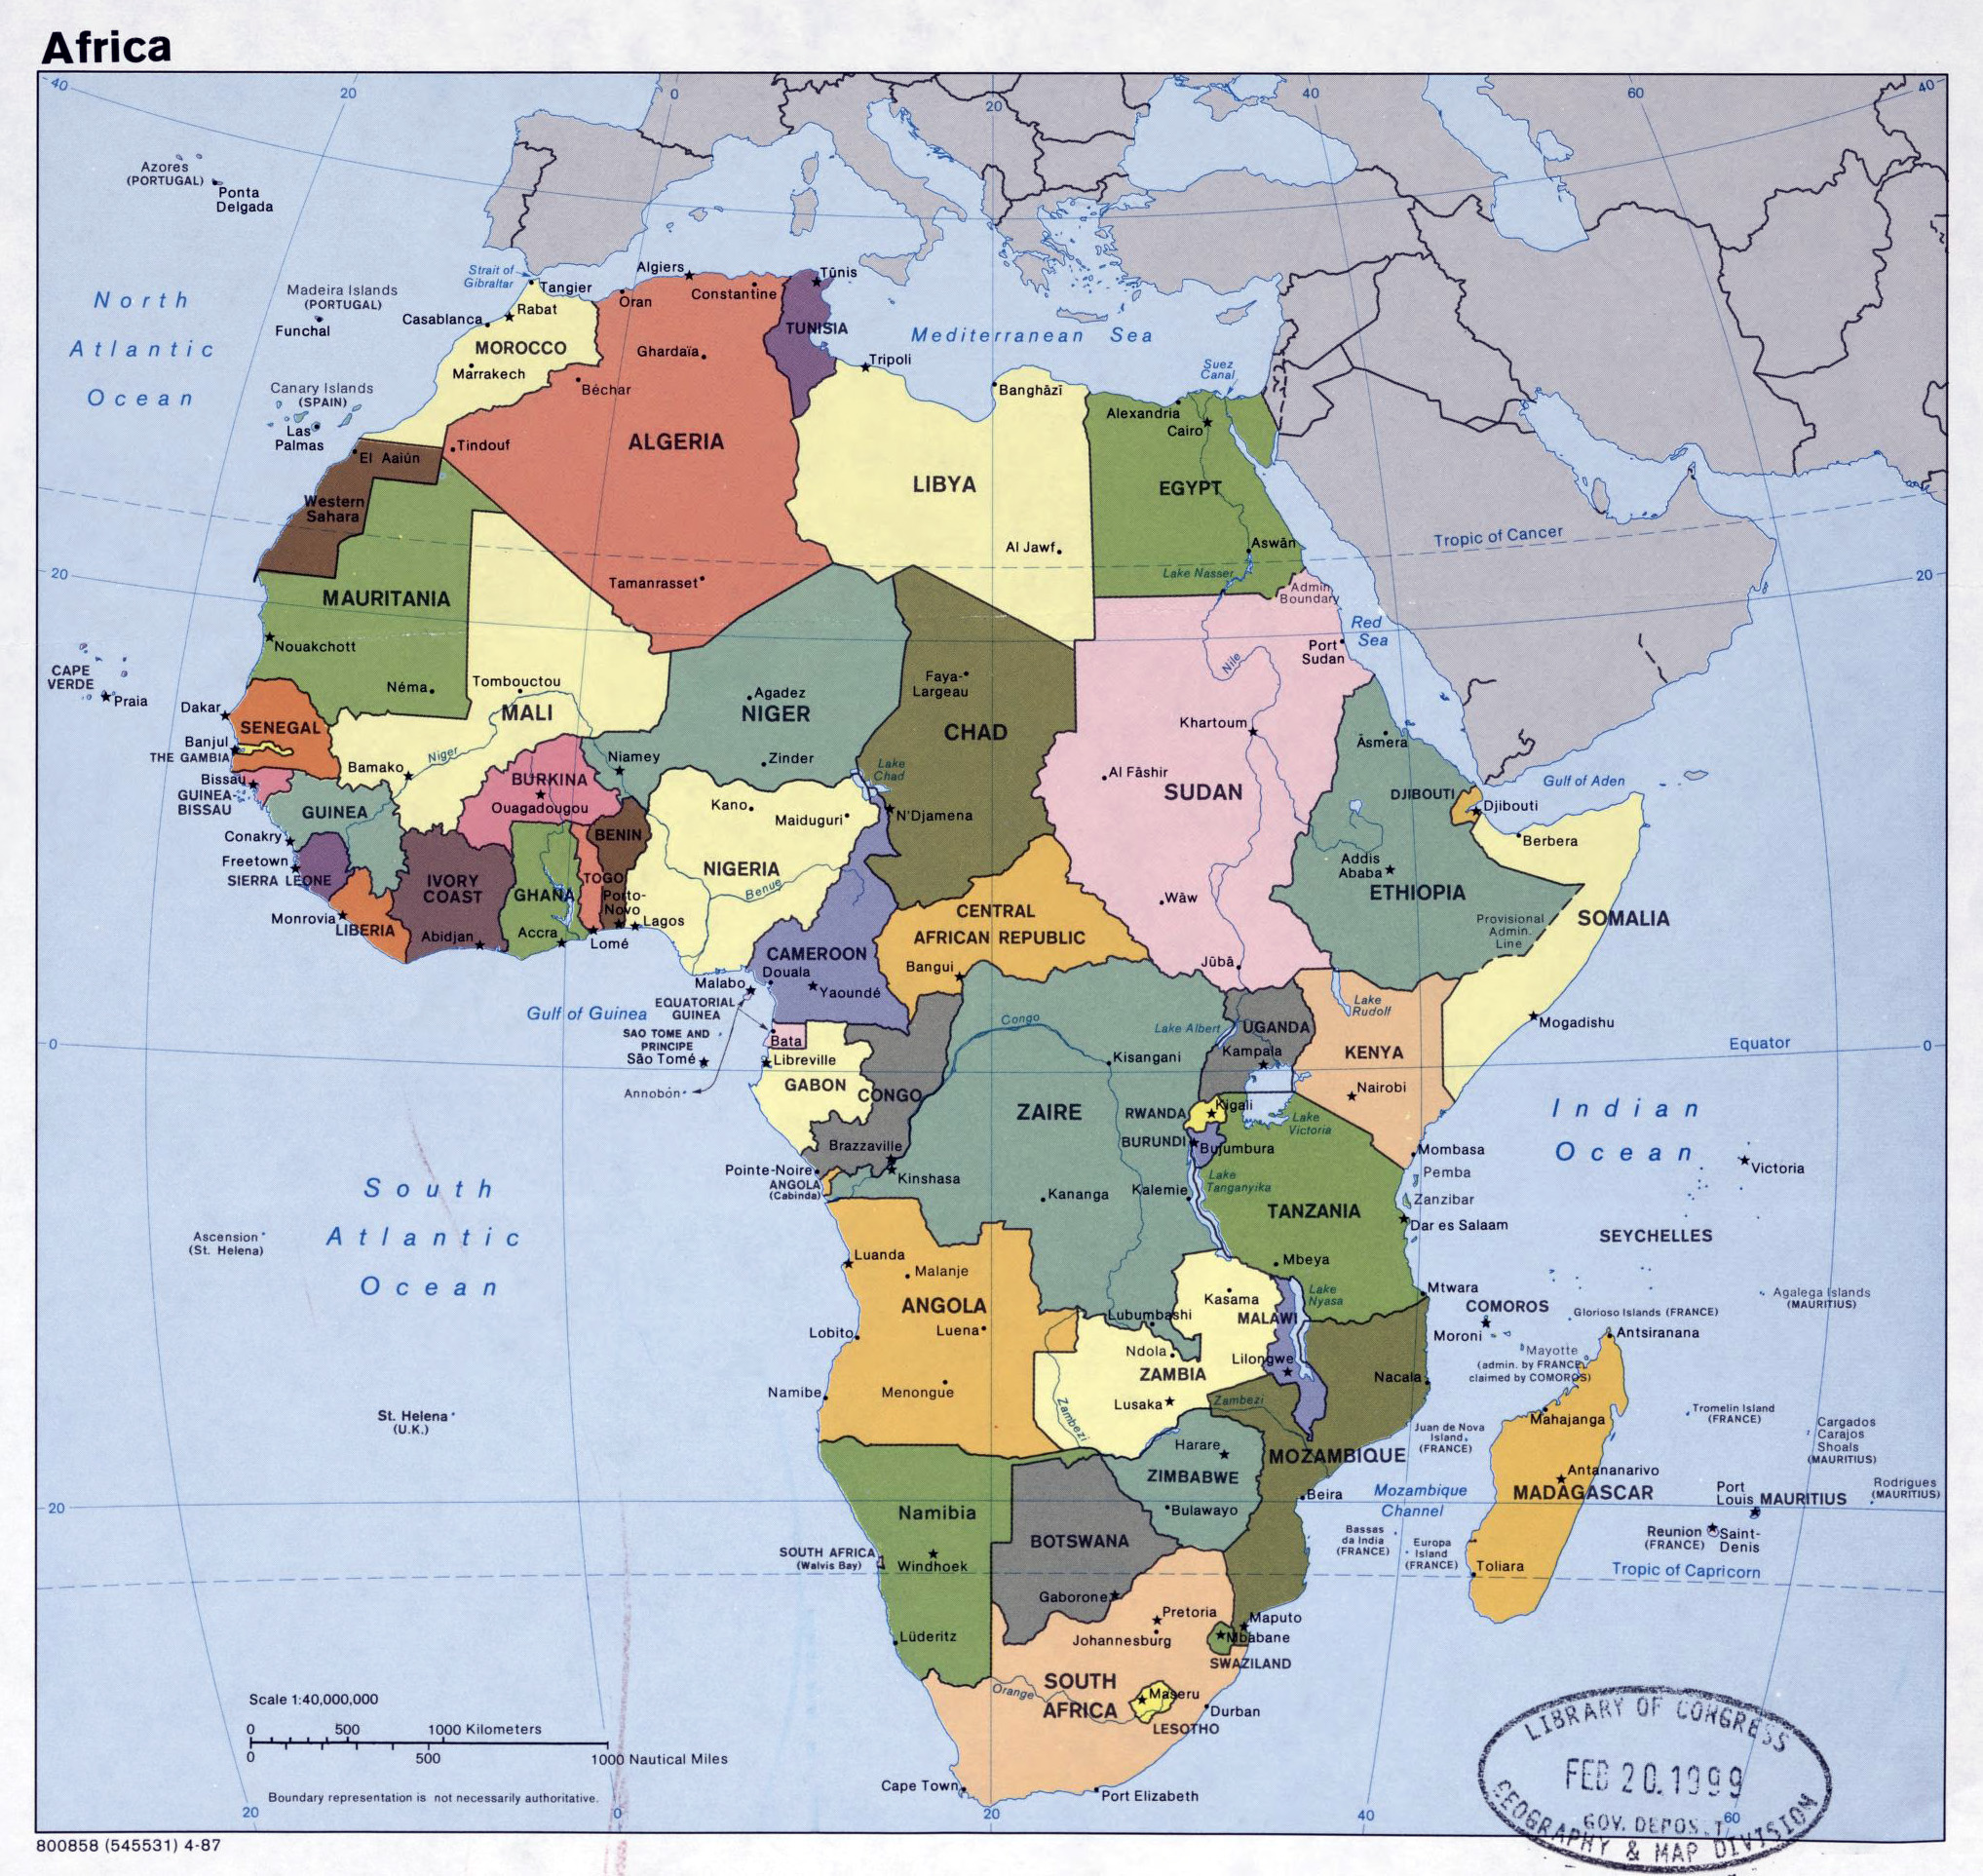 large-detailed-political-map-of-africa-with-major-cities-and-capitals